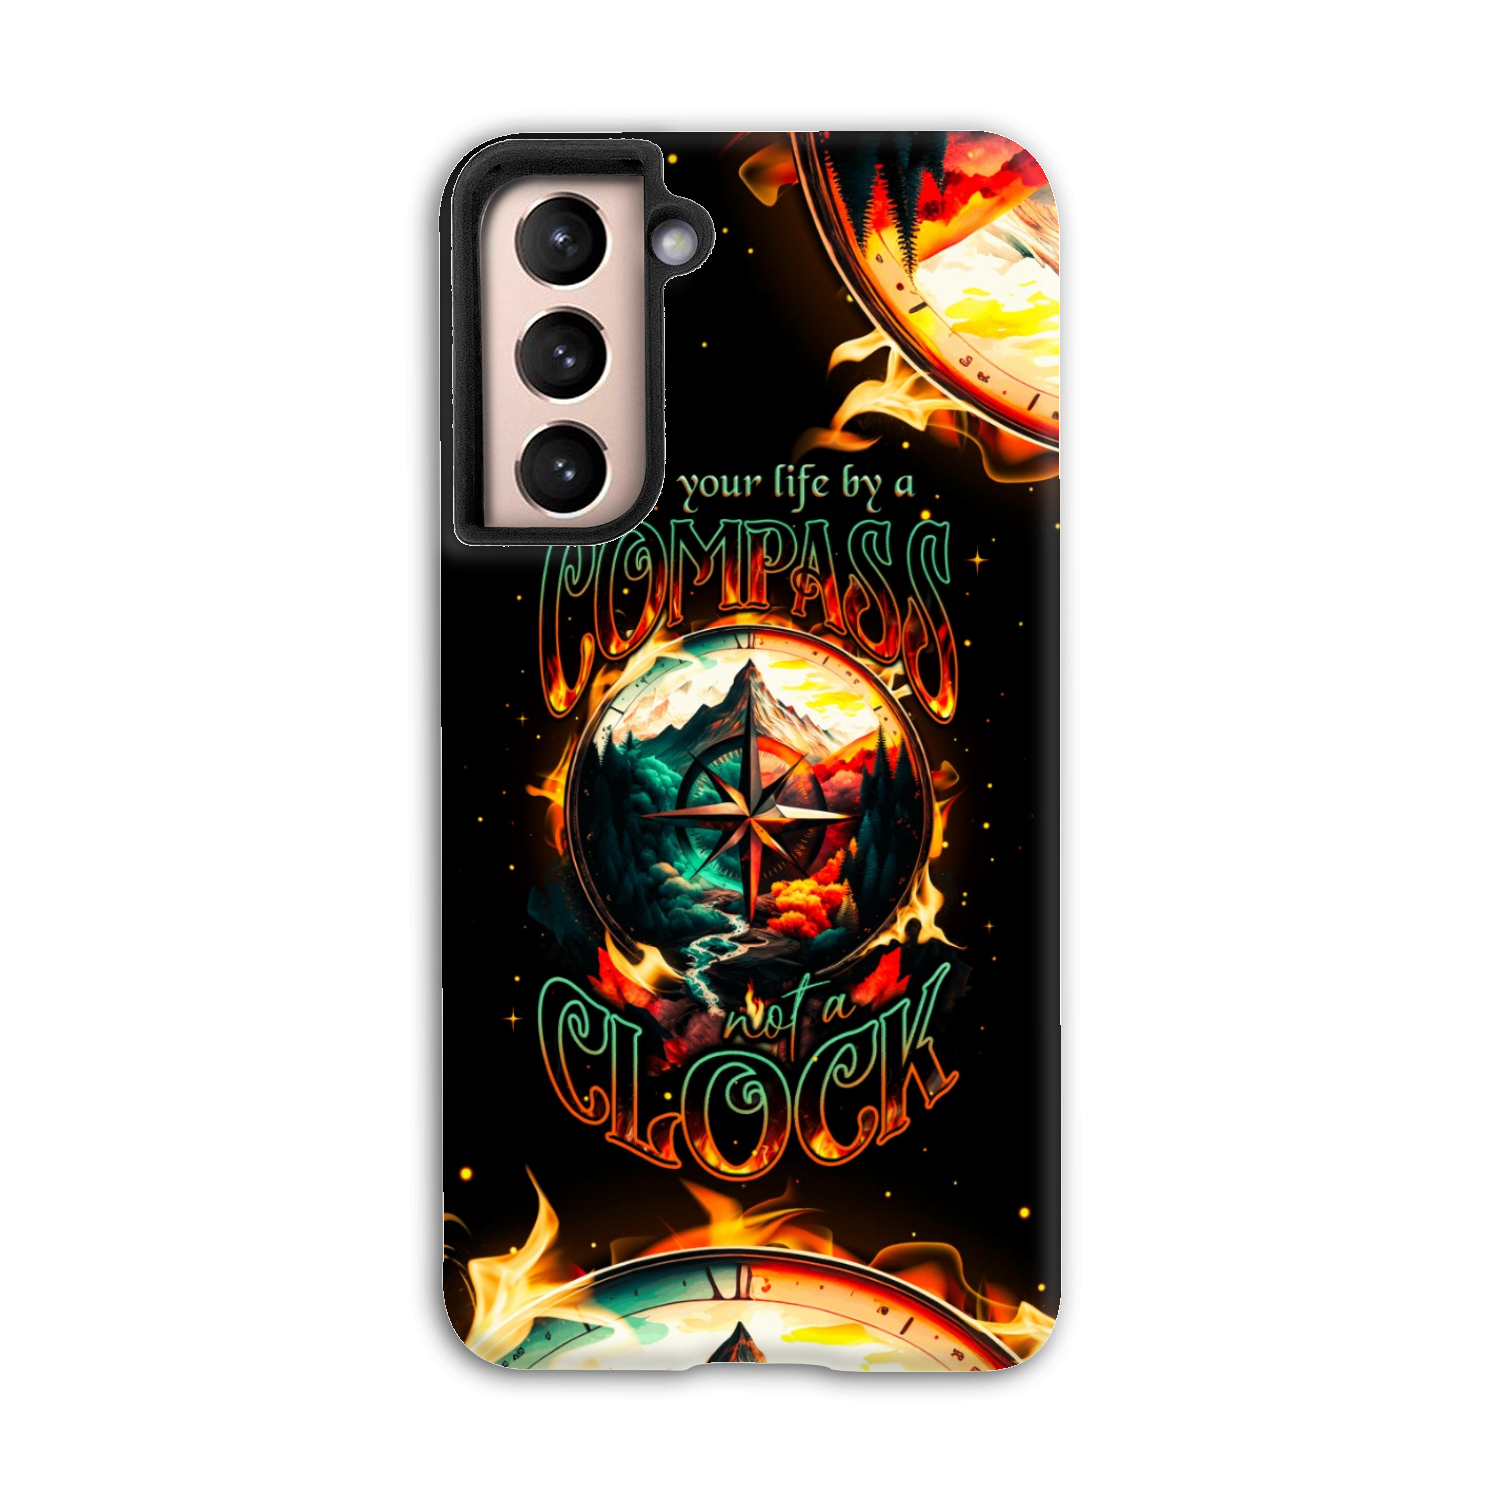 LIVE YOUR LIFE BY A COMPASS PHONE CASE - TY2804234